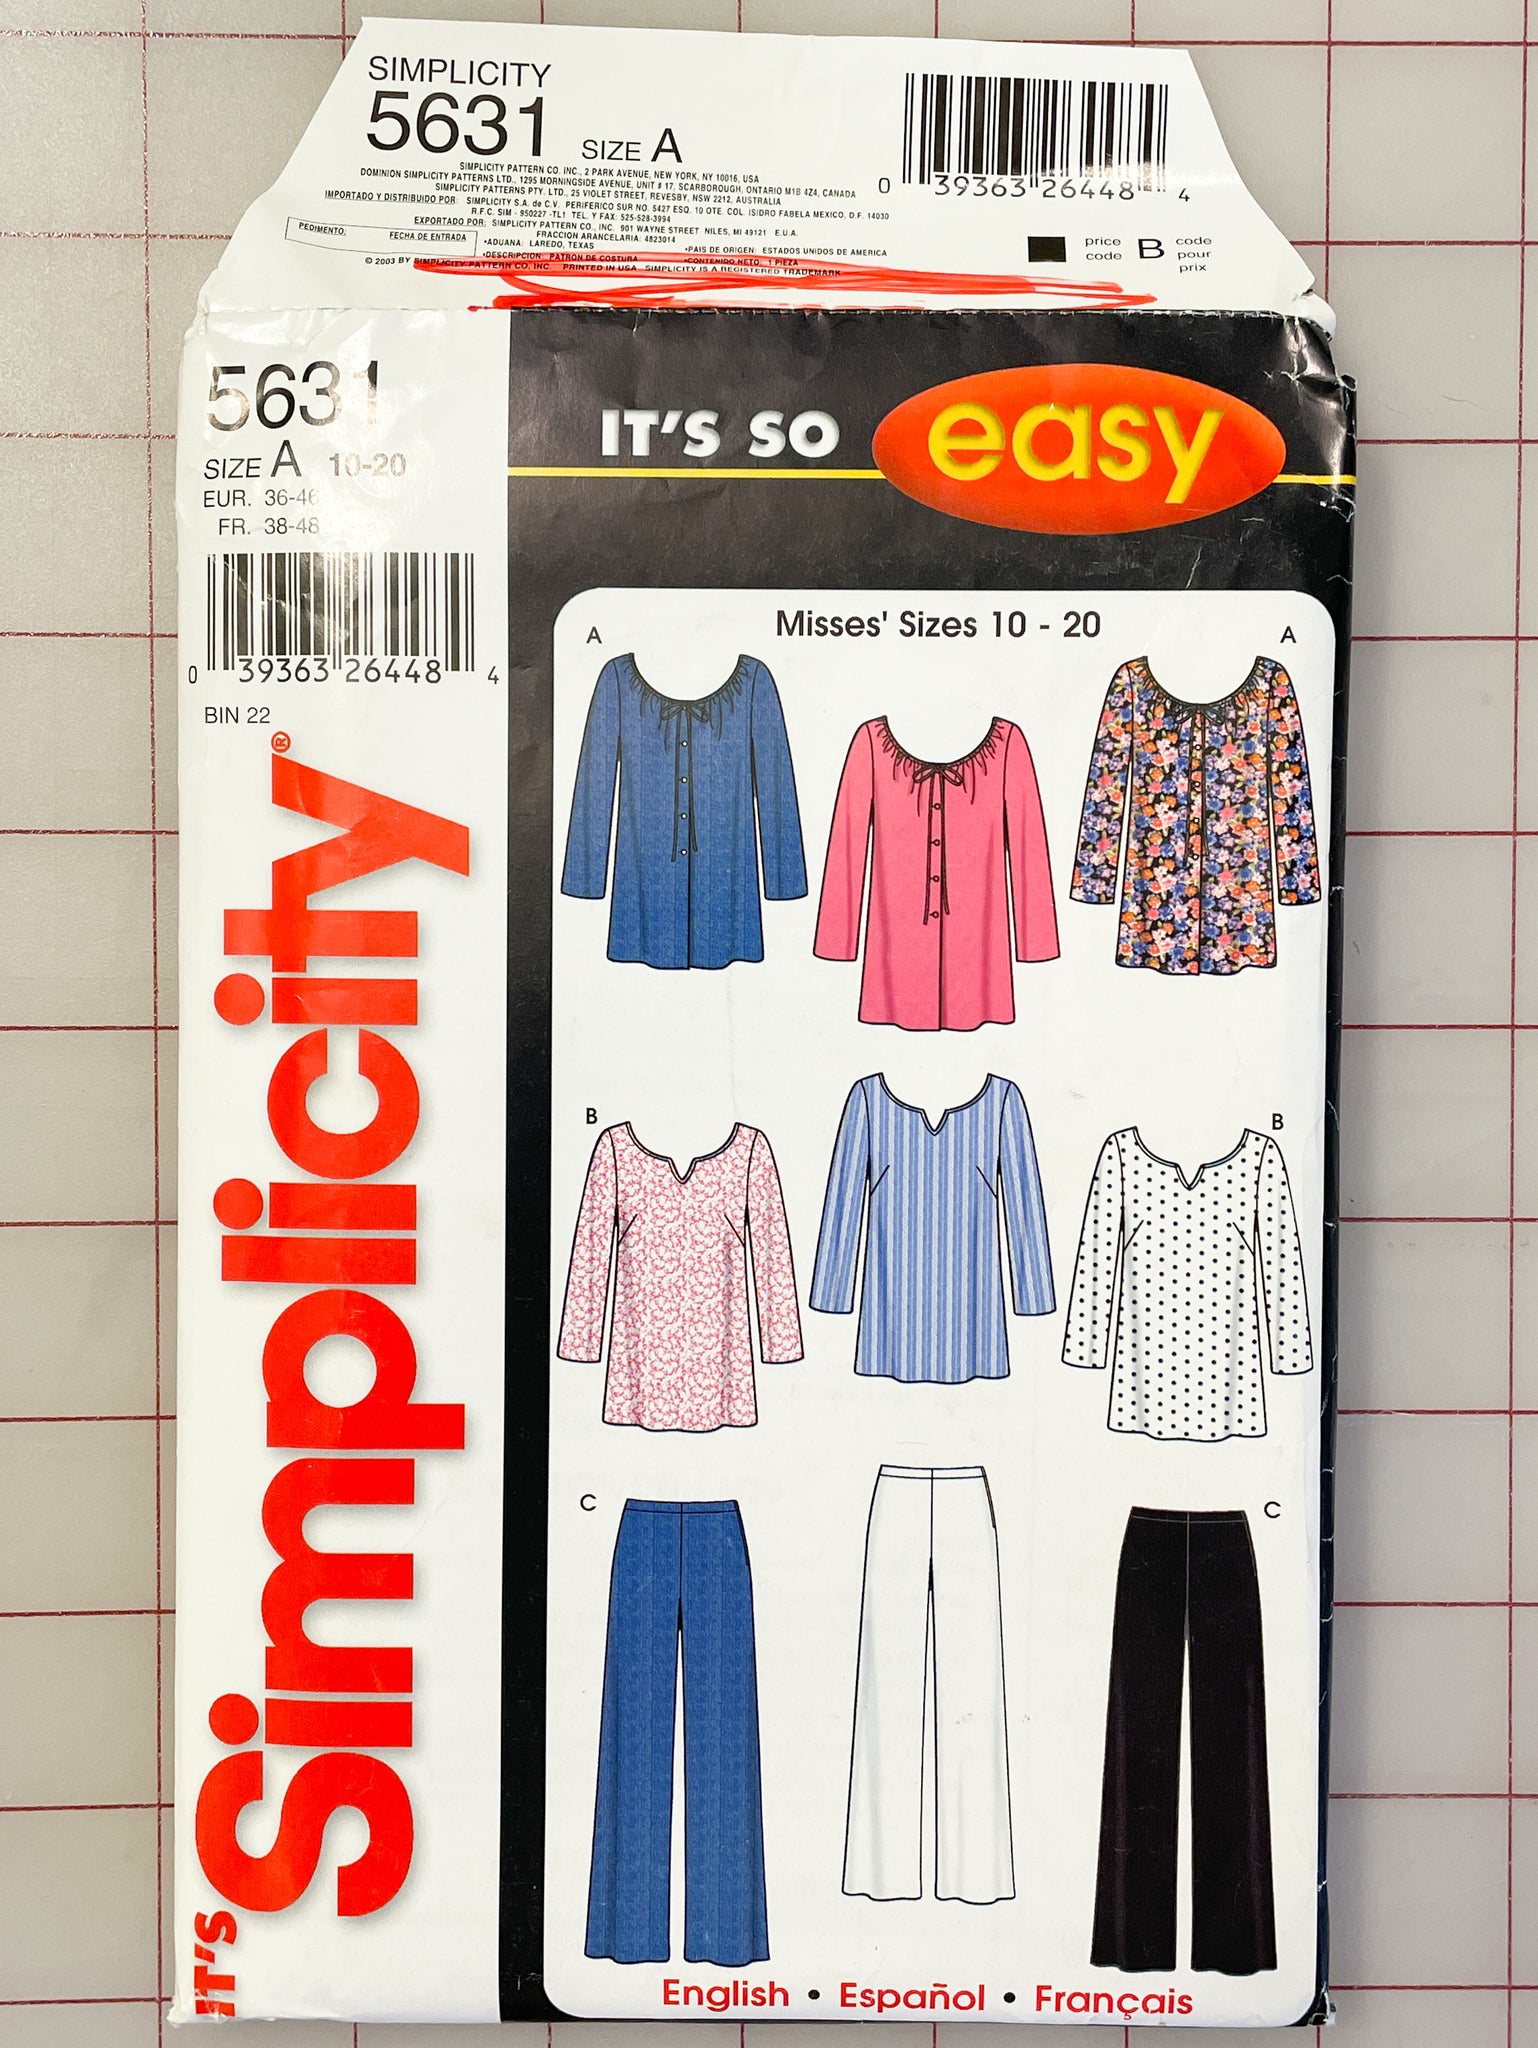 SALE 2003 Simplicity 5631 Pattern - Blouses and Pants FACTORY FOLDED